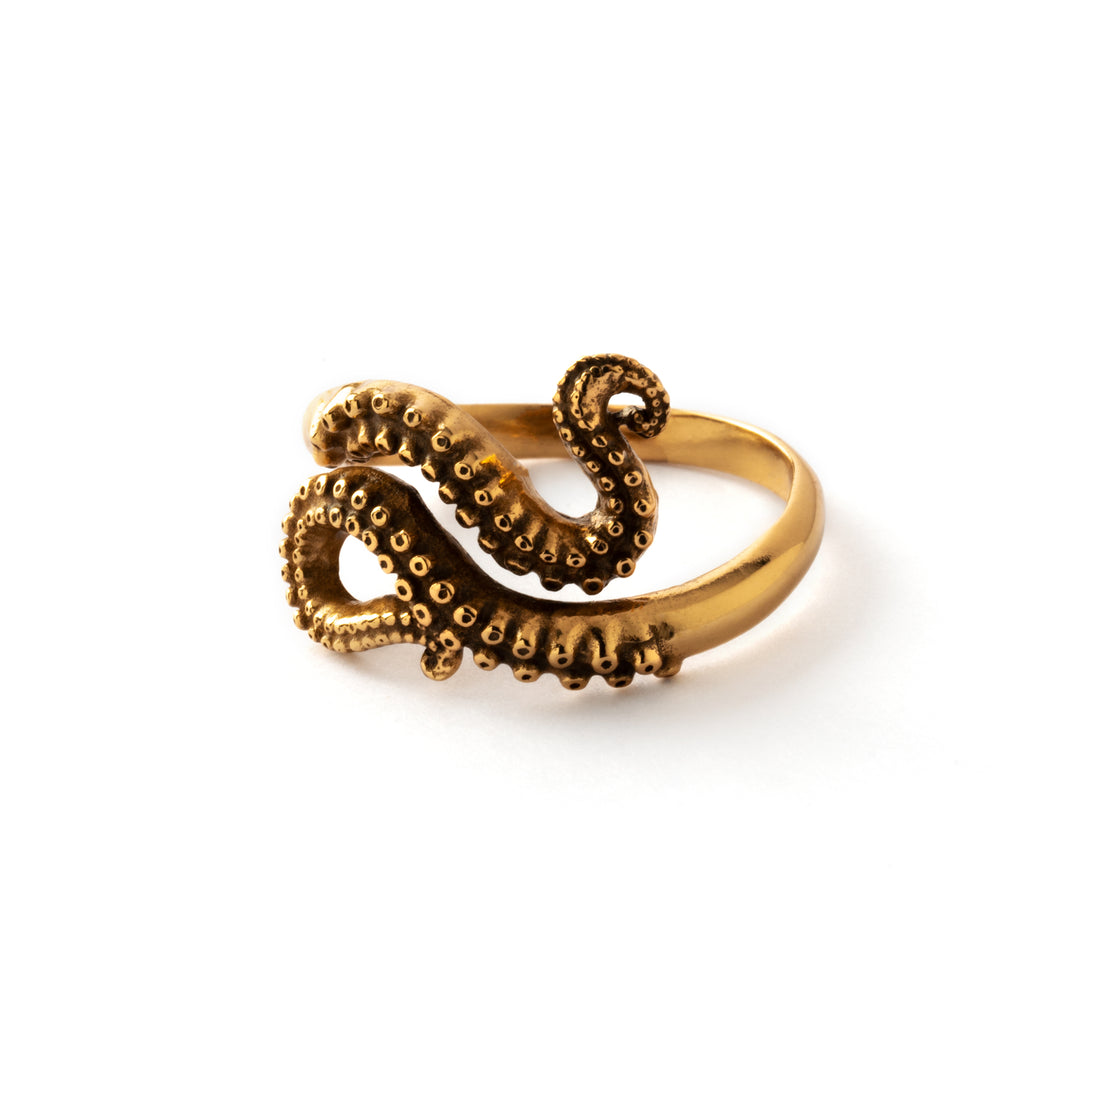 Bronze octopus tentacles wrap ring right side view